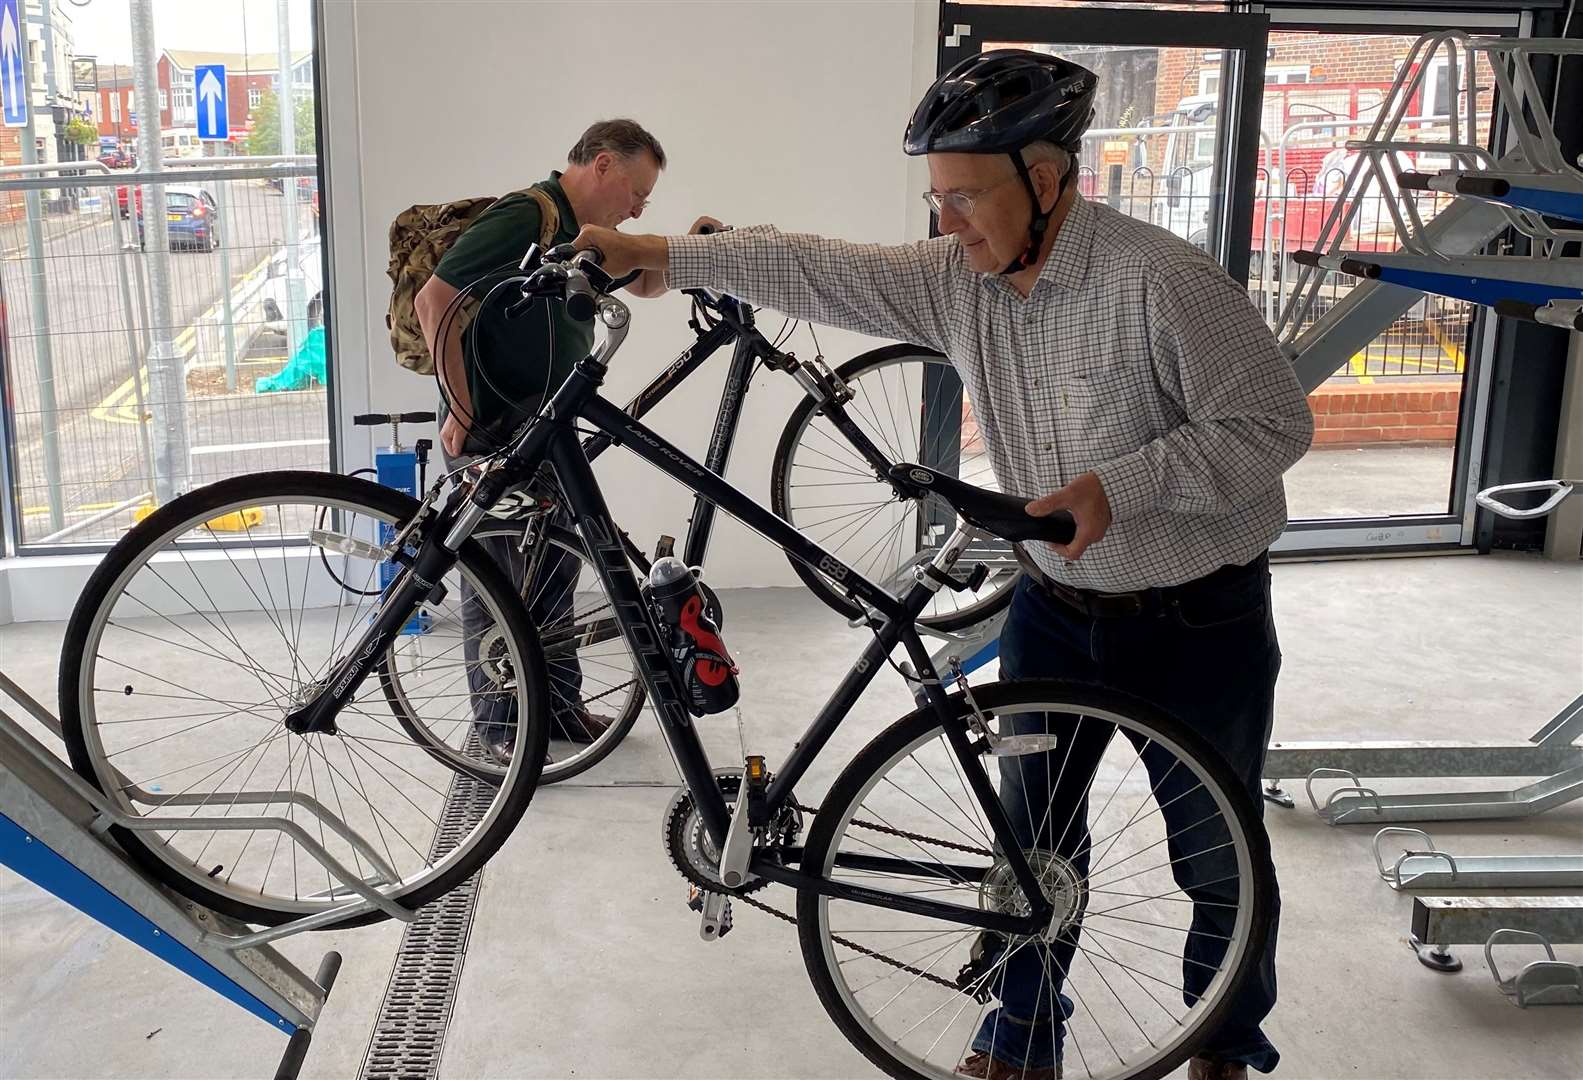 Tonbridge councillors Richard Long and Michael Payne visit the cycle hub which is near completion